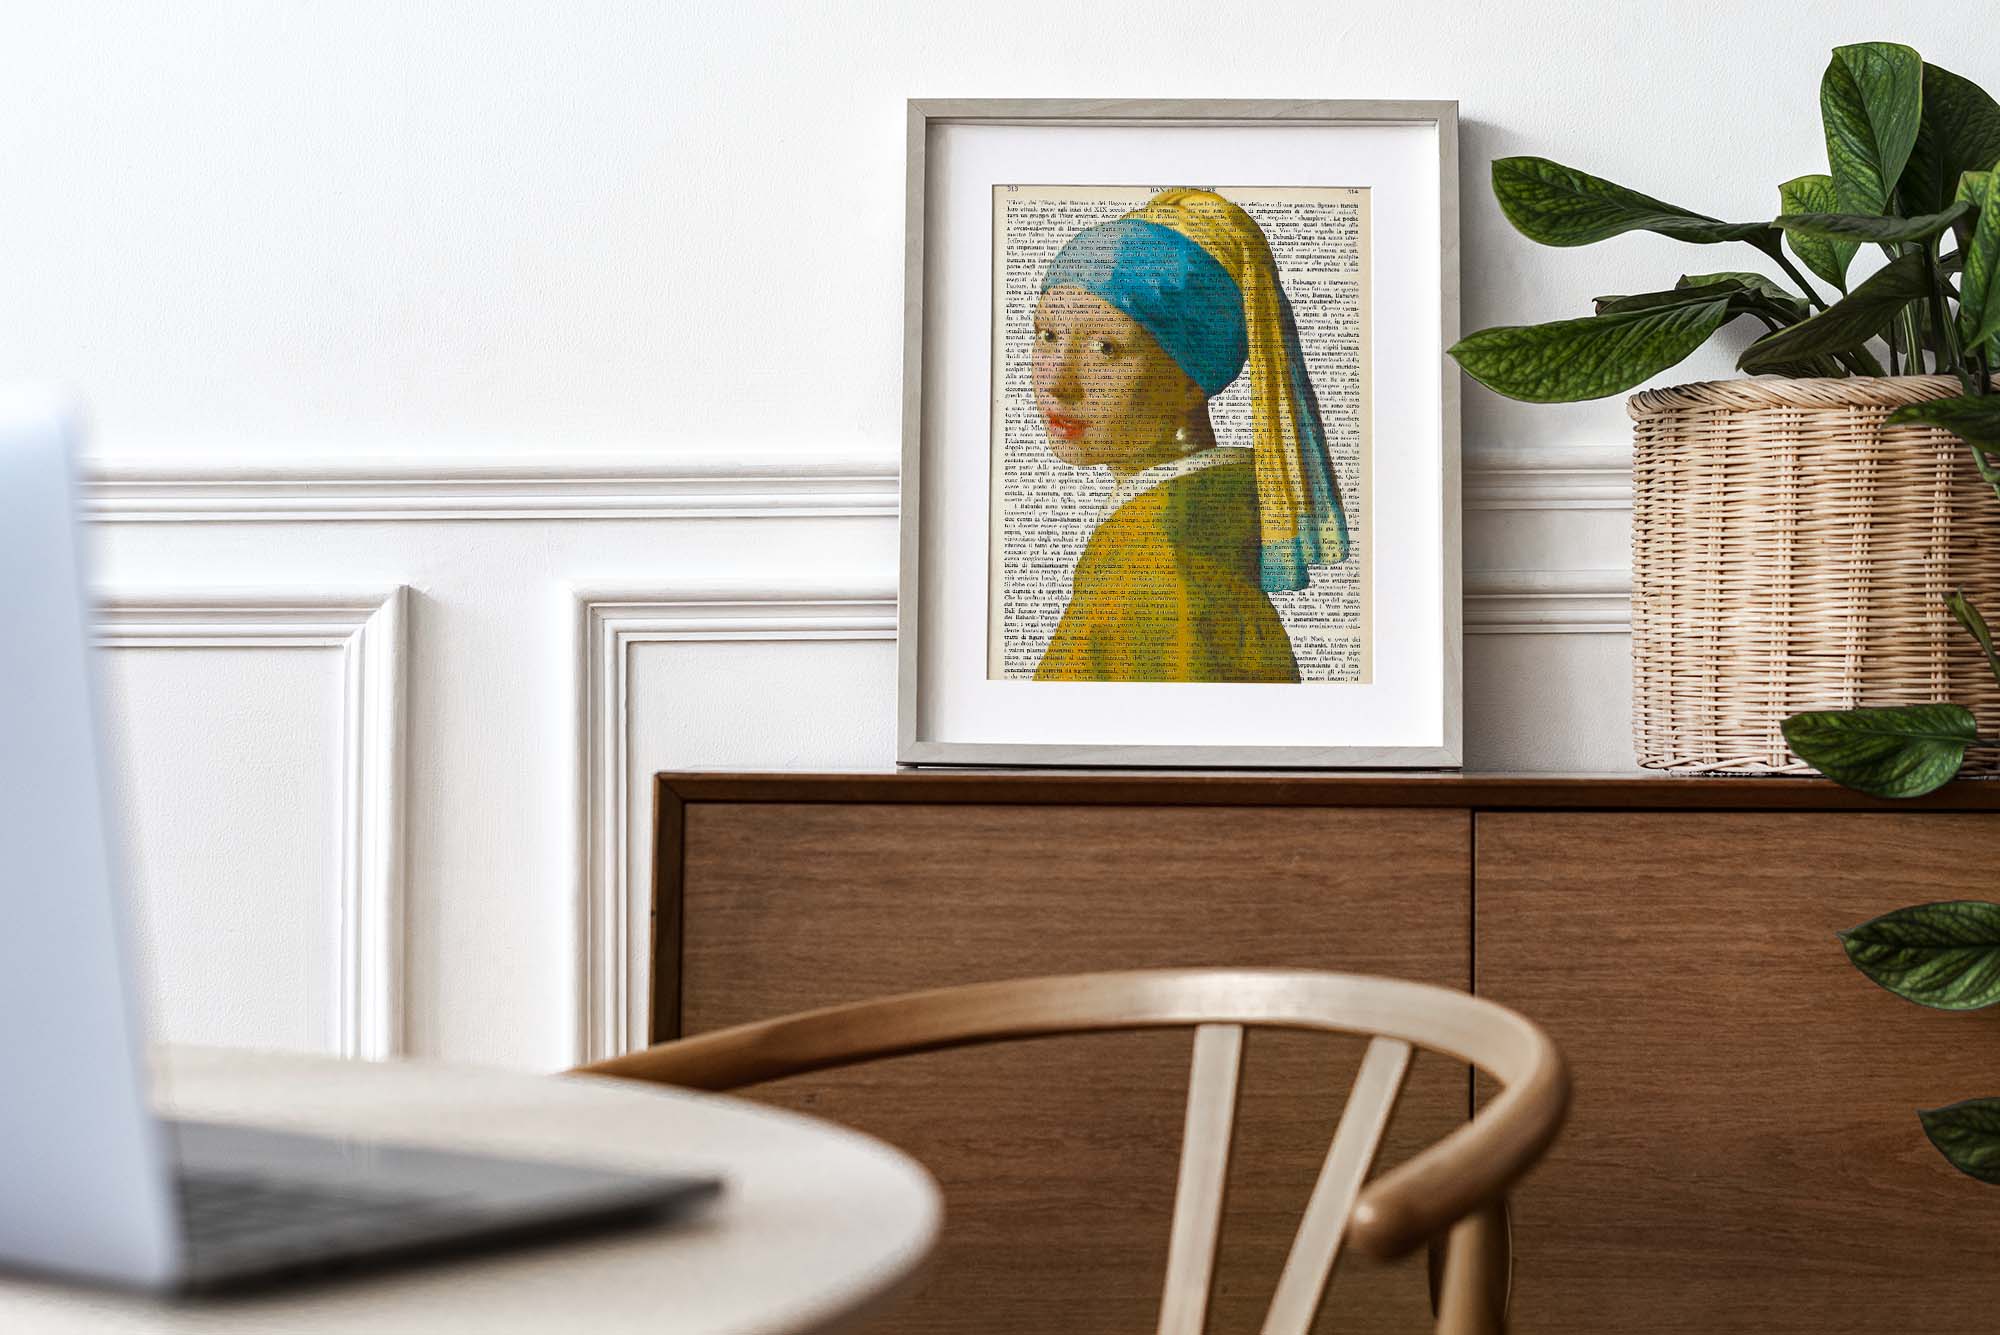 Mix-up: The Girl with a Pearl Earring - Vermeer